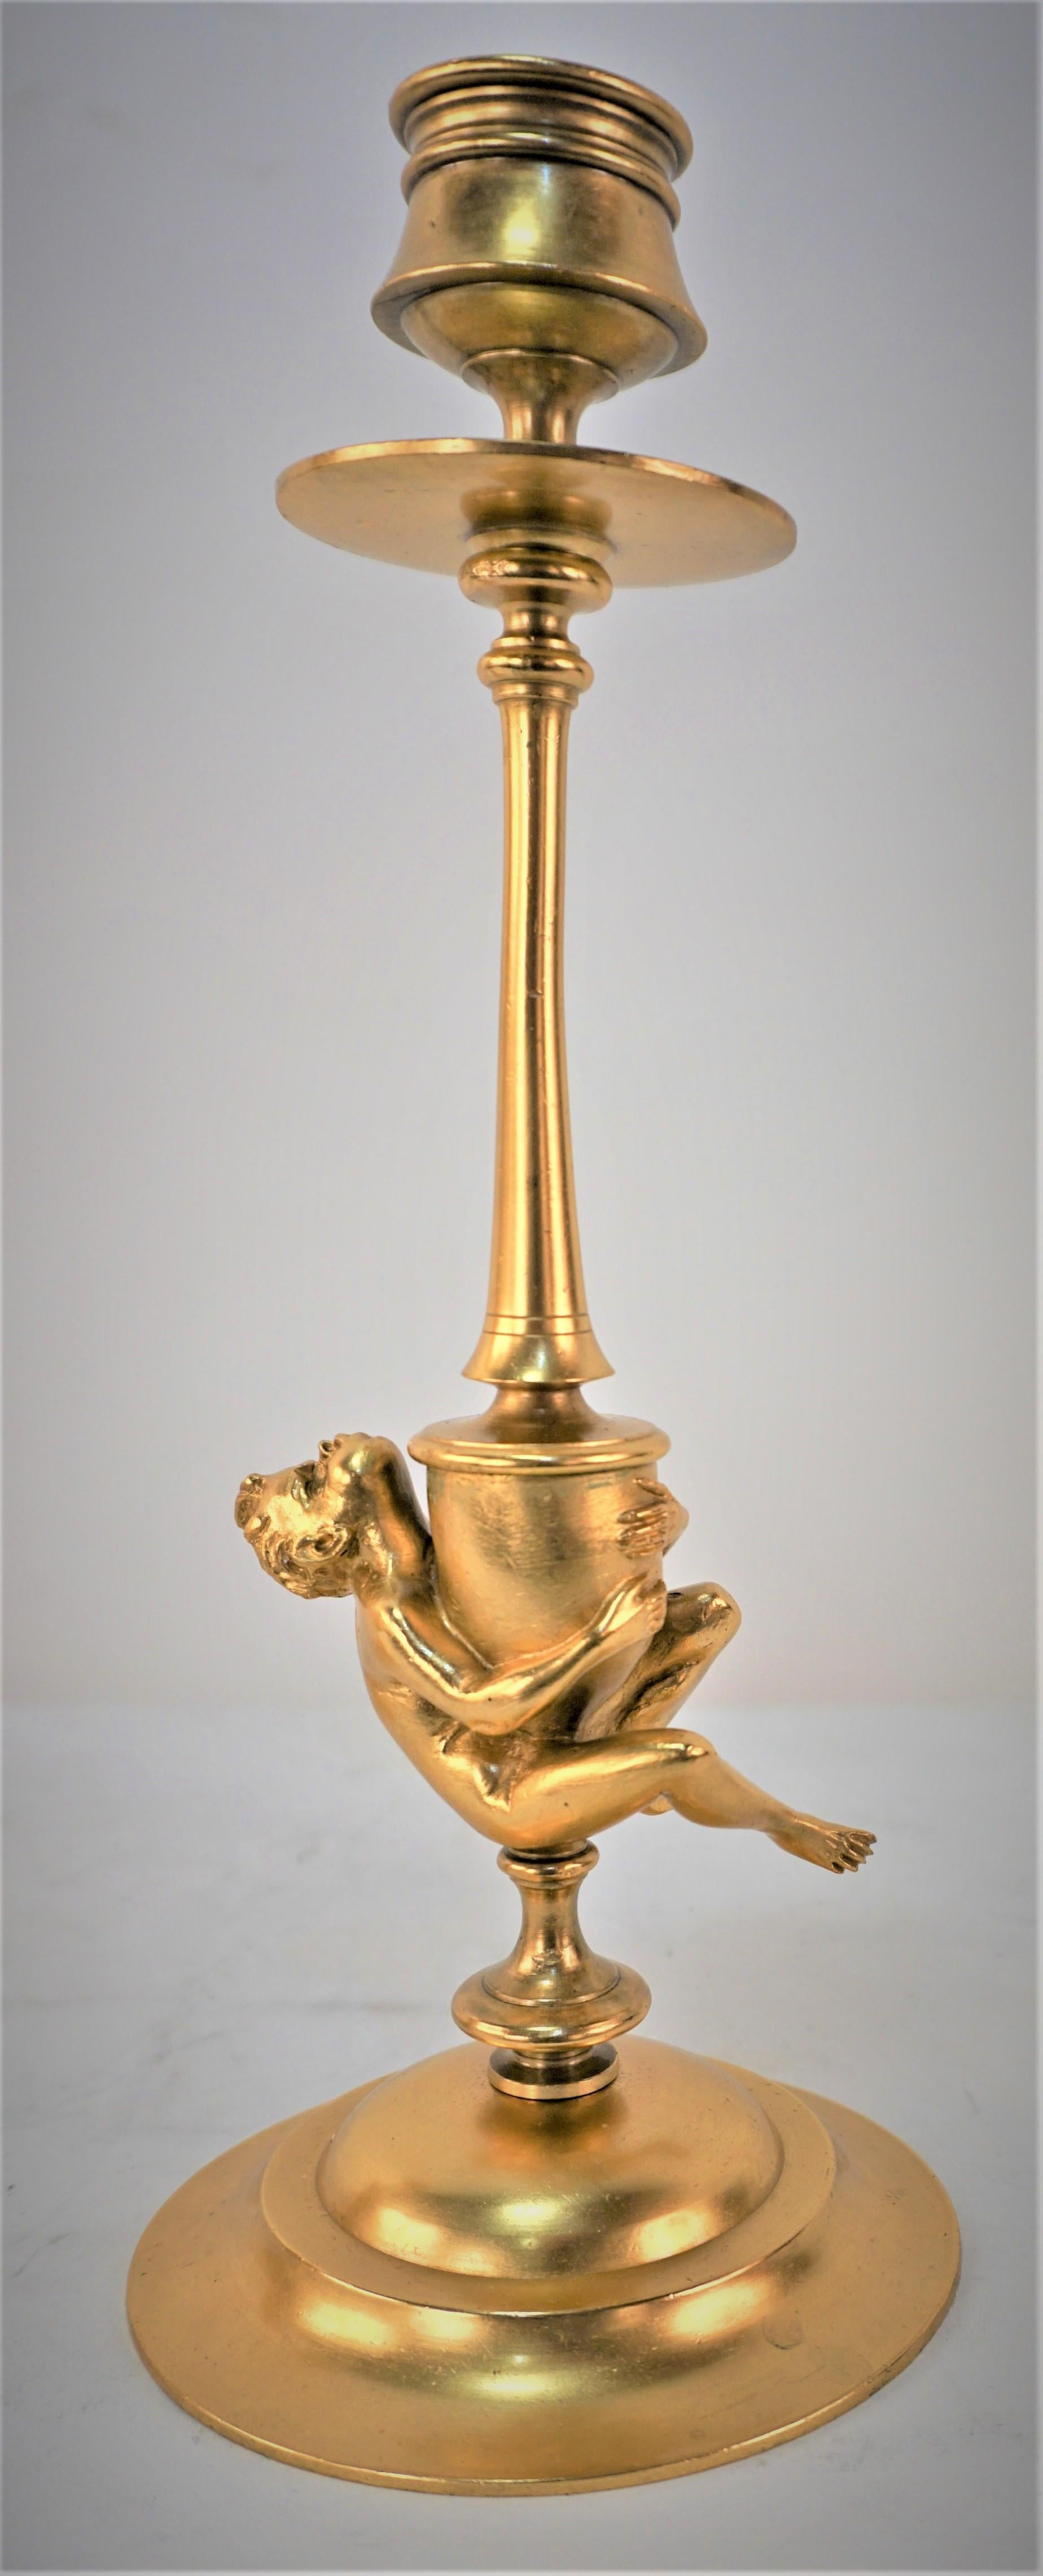 Pair of early 20th century gilt bronze candlesticks.